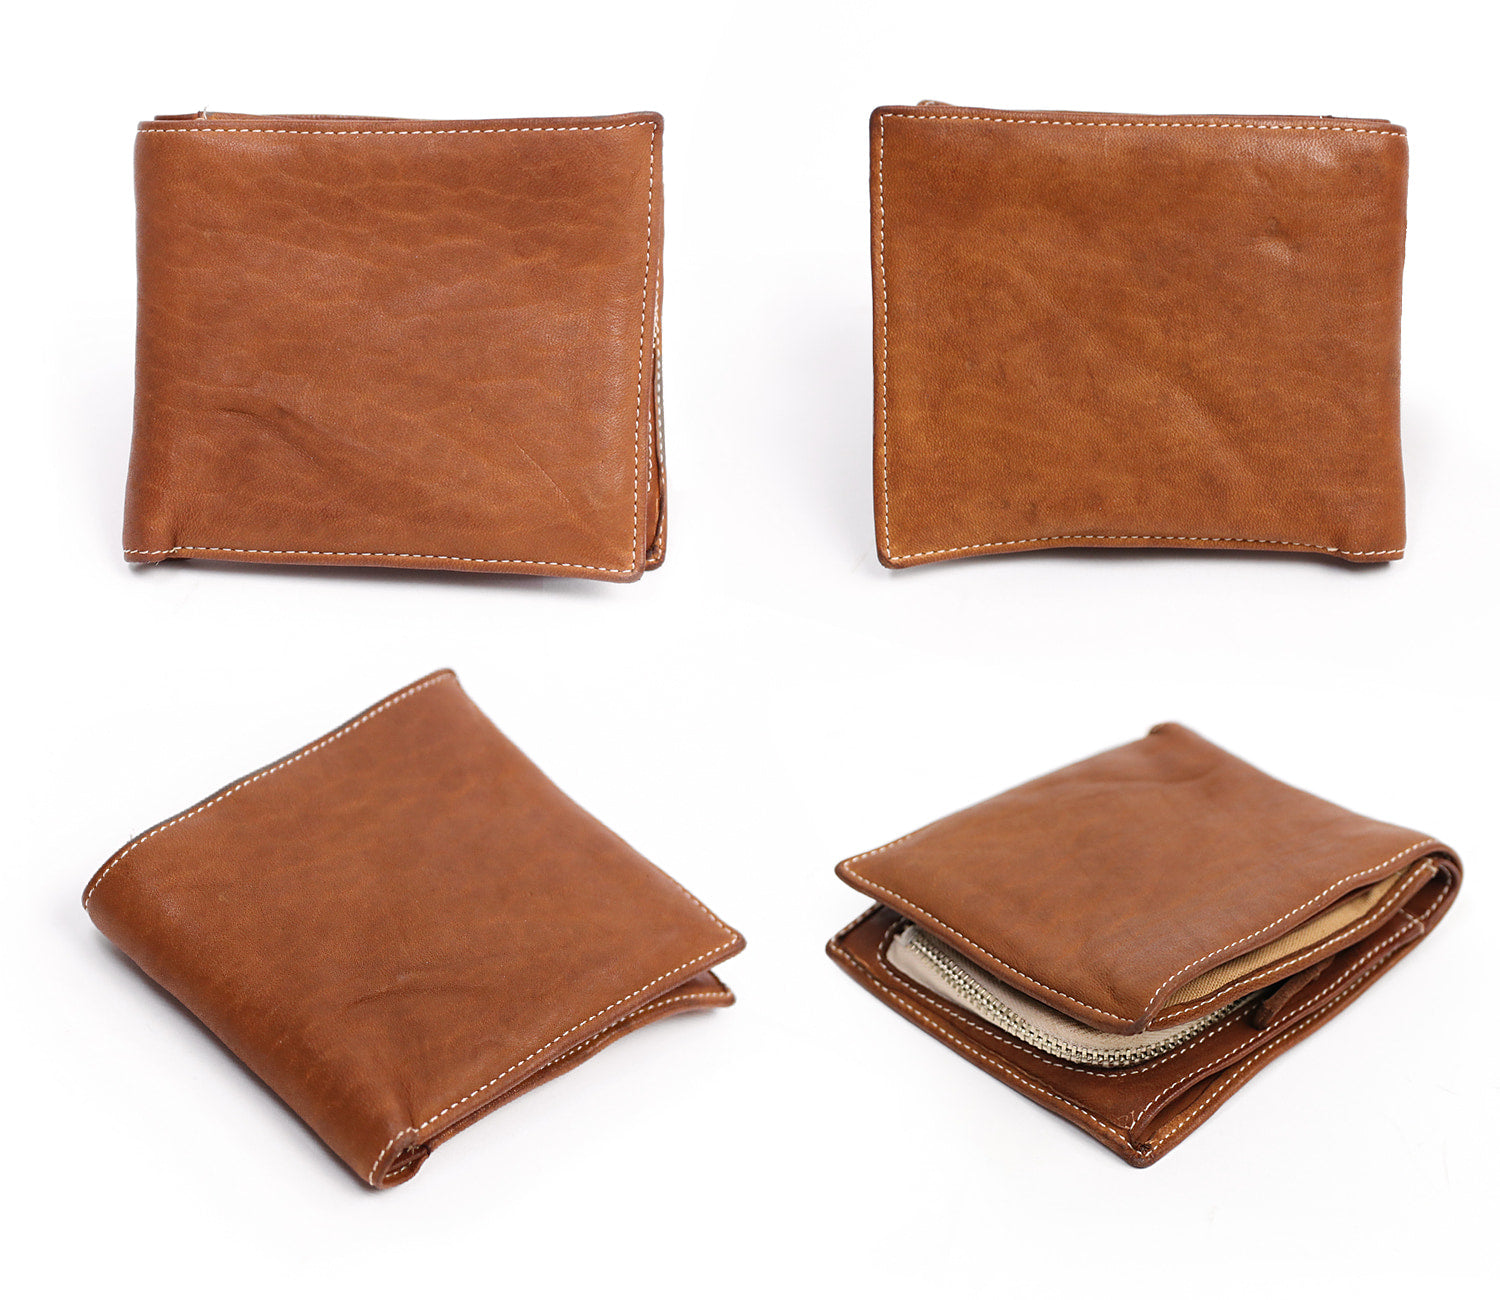 REALMIND / FORO A unique texture. Soft and lightweight folding wallet made of high-quality piece-dyed horse-tanned leather